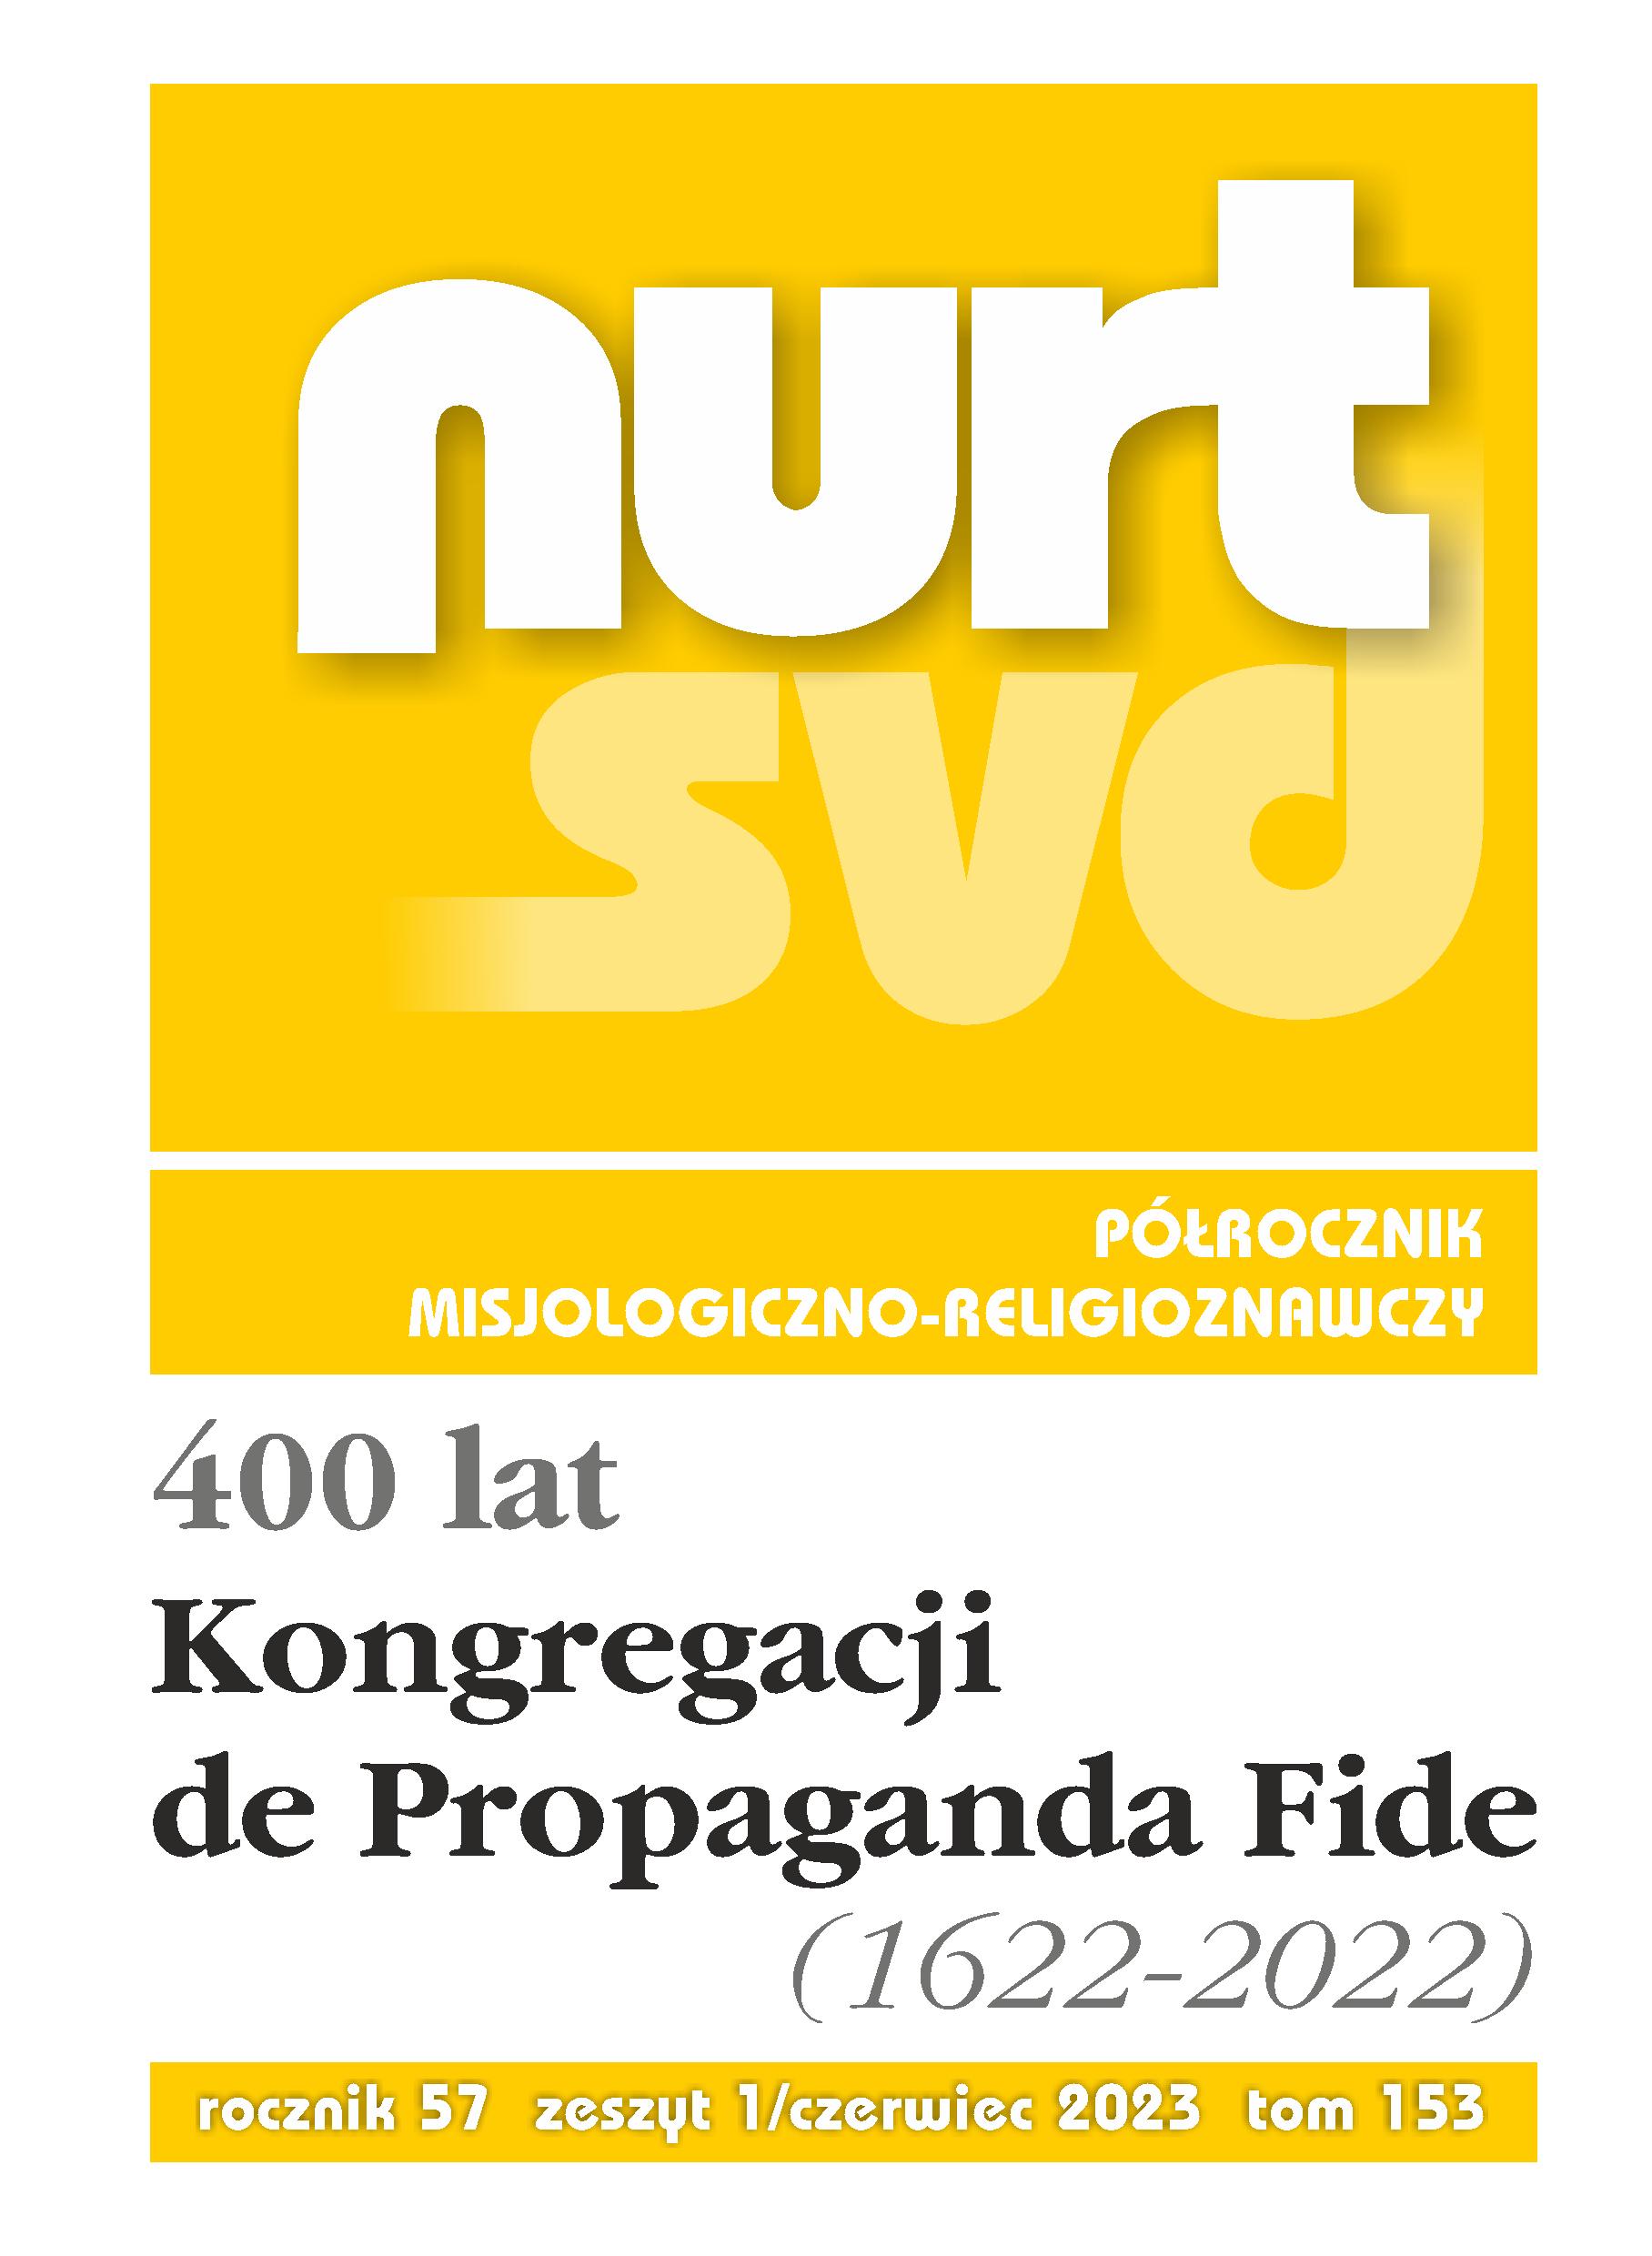 Preparation and Formation of Missionaries by the Congregation de Propaganda Fide – an Outline of History Cover Image